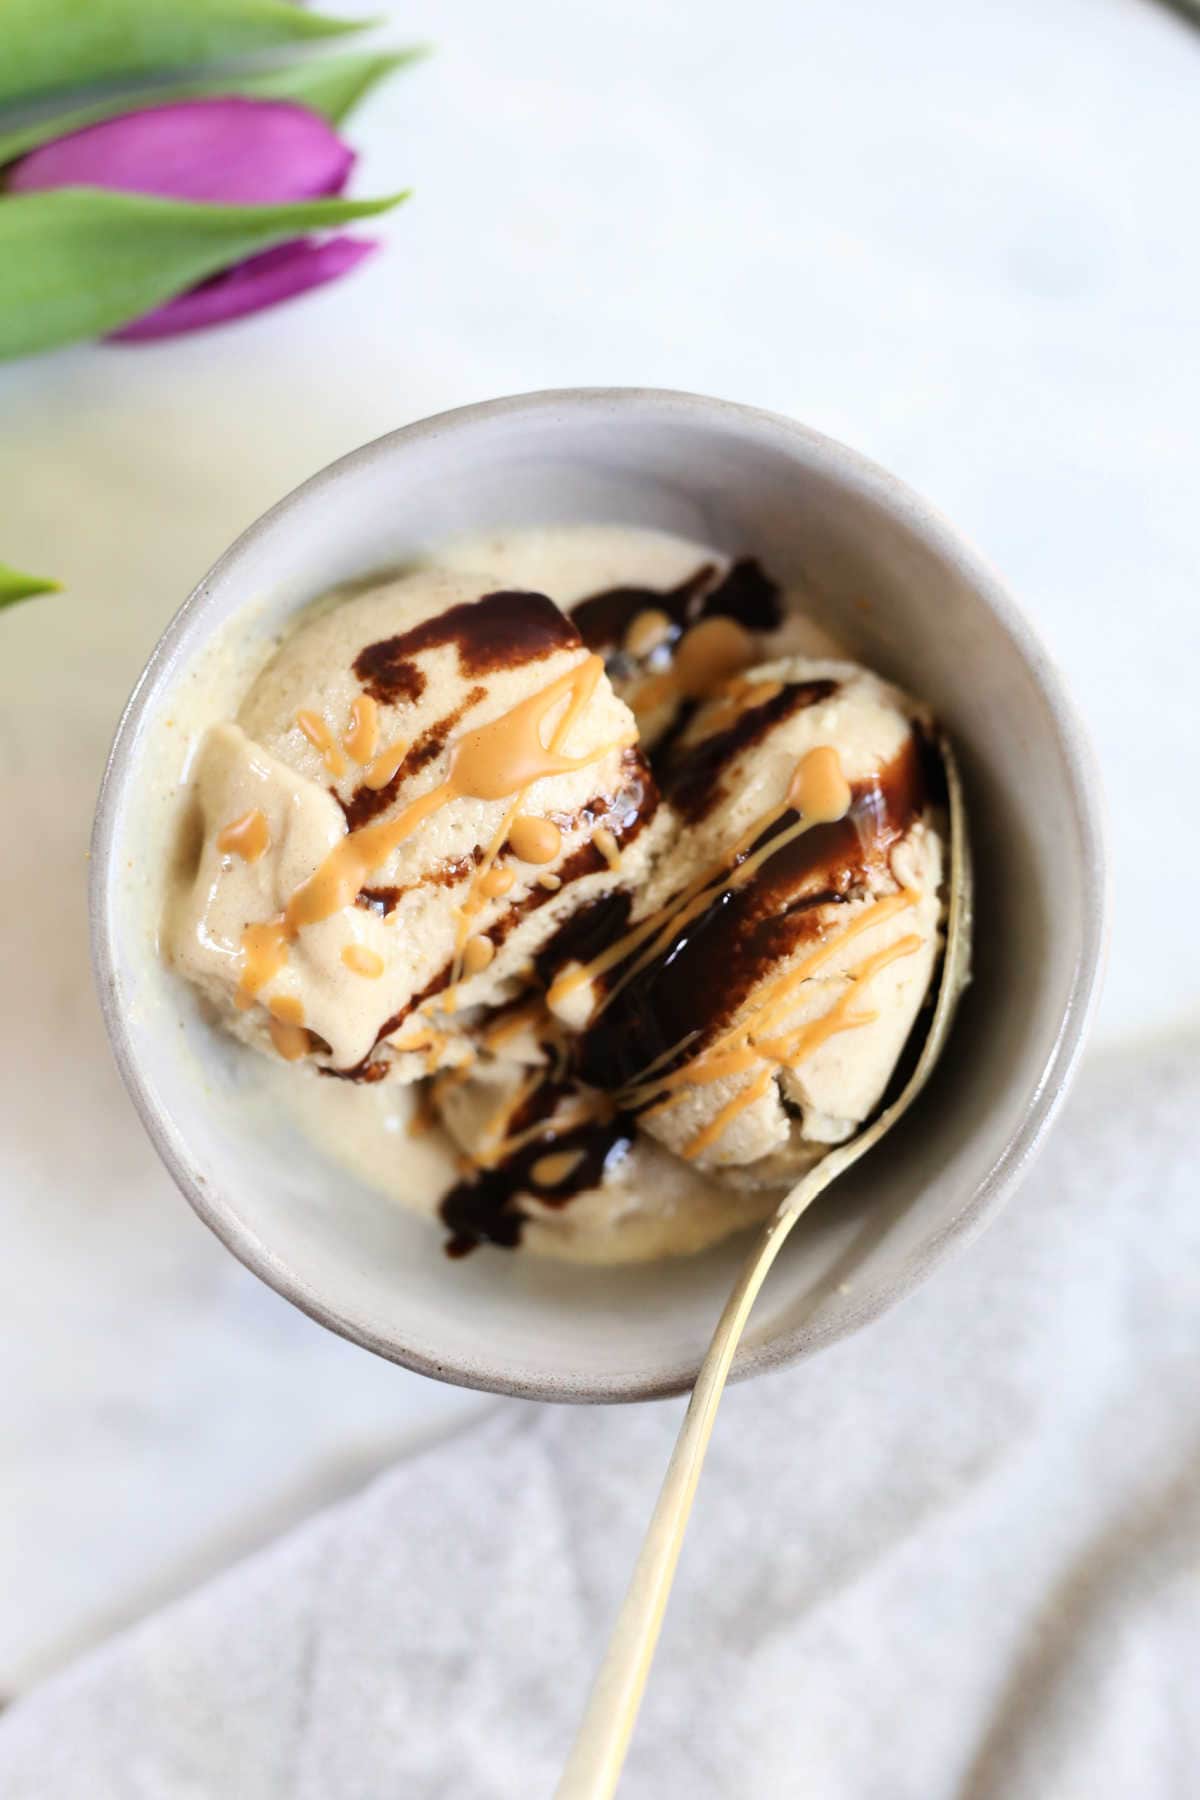 Vegan Banana Ice Cream Scoops in a Bowl with a Spoon